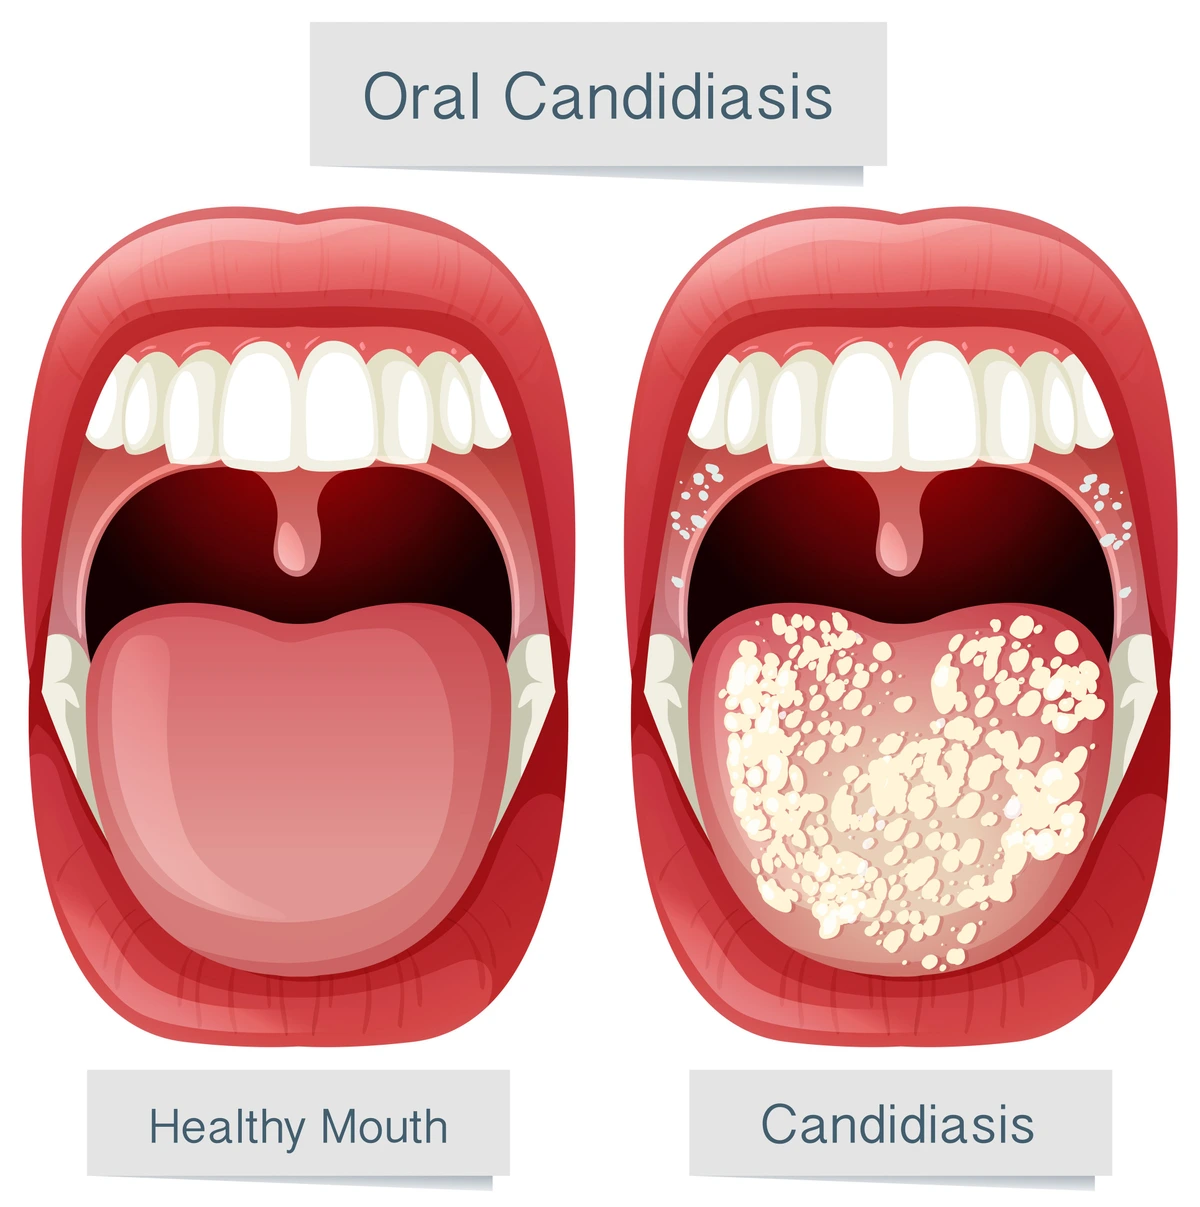 Mouth Of An Aids Patient Showing Oral Candidiasis By Mary's Hospital  Medical School/science Photo Library, Candida In Mouth